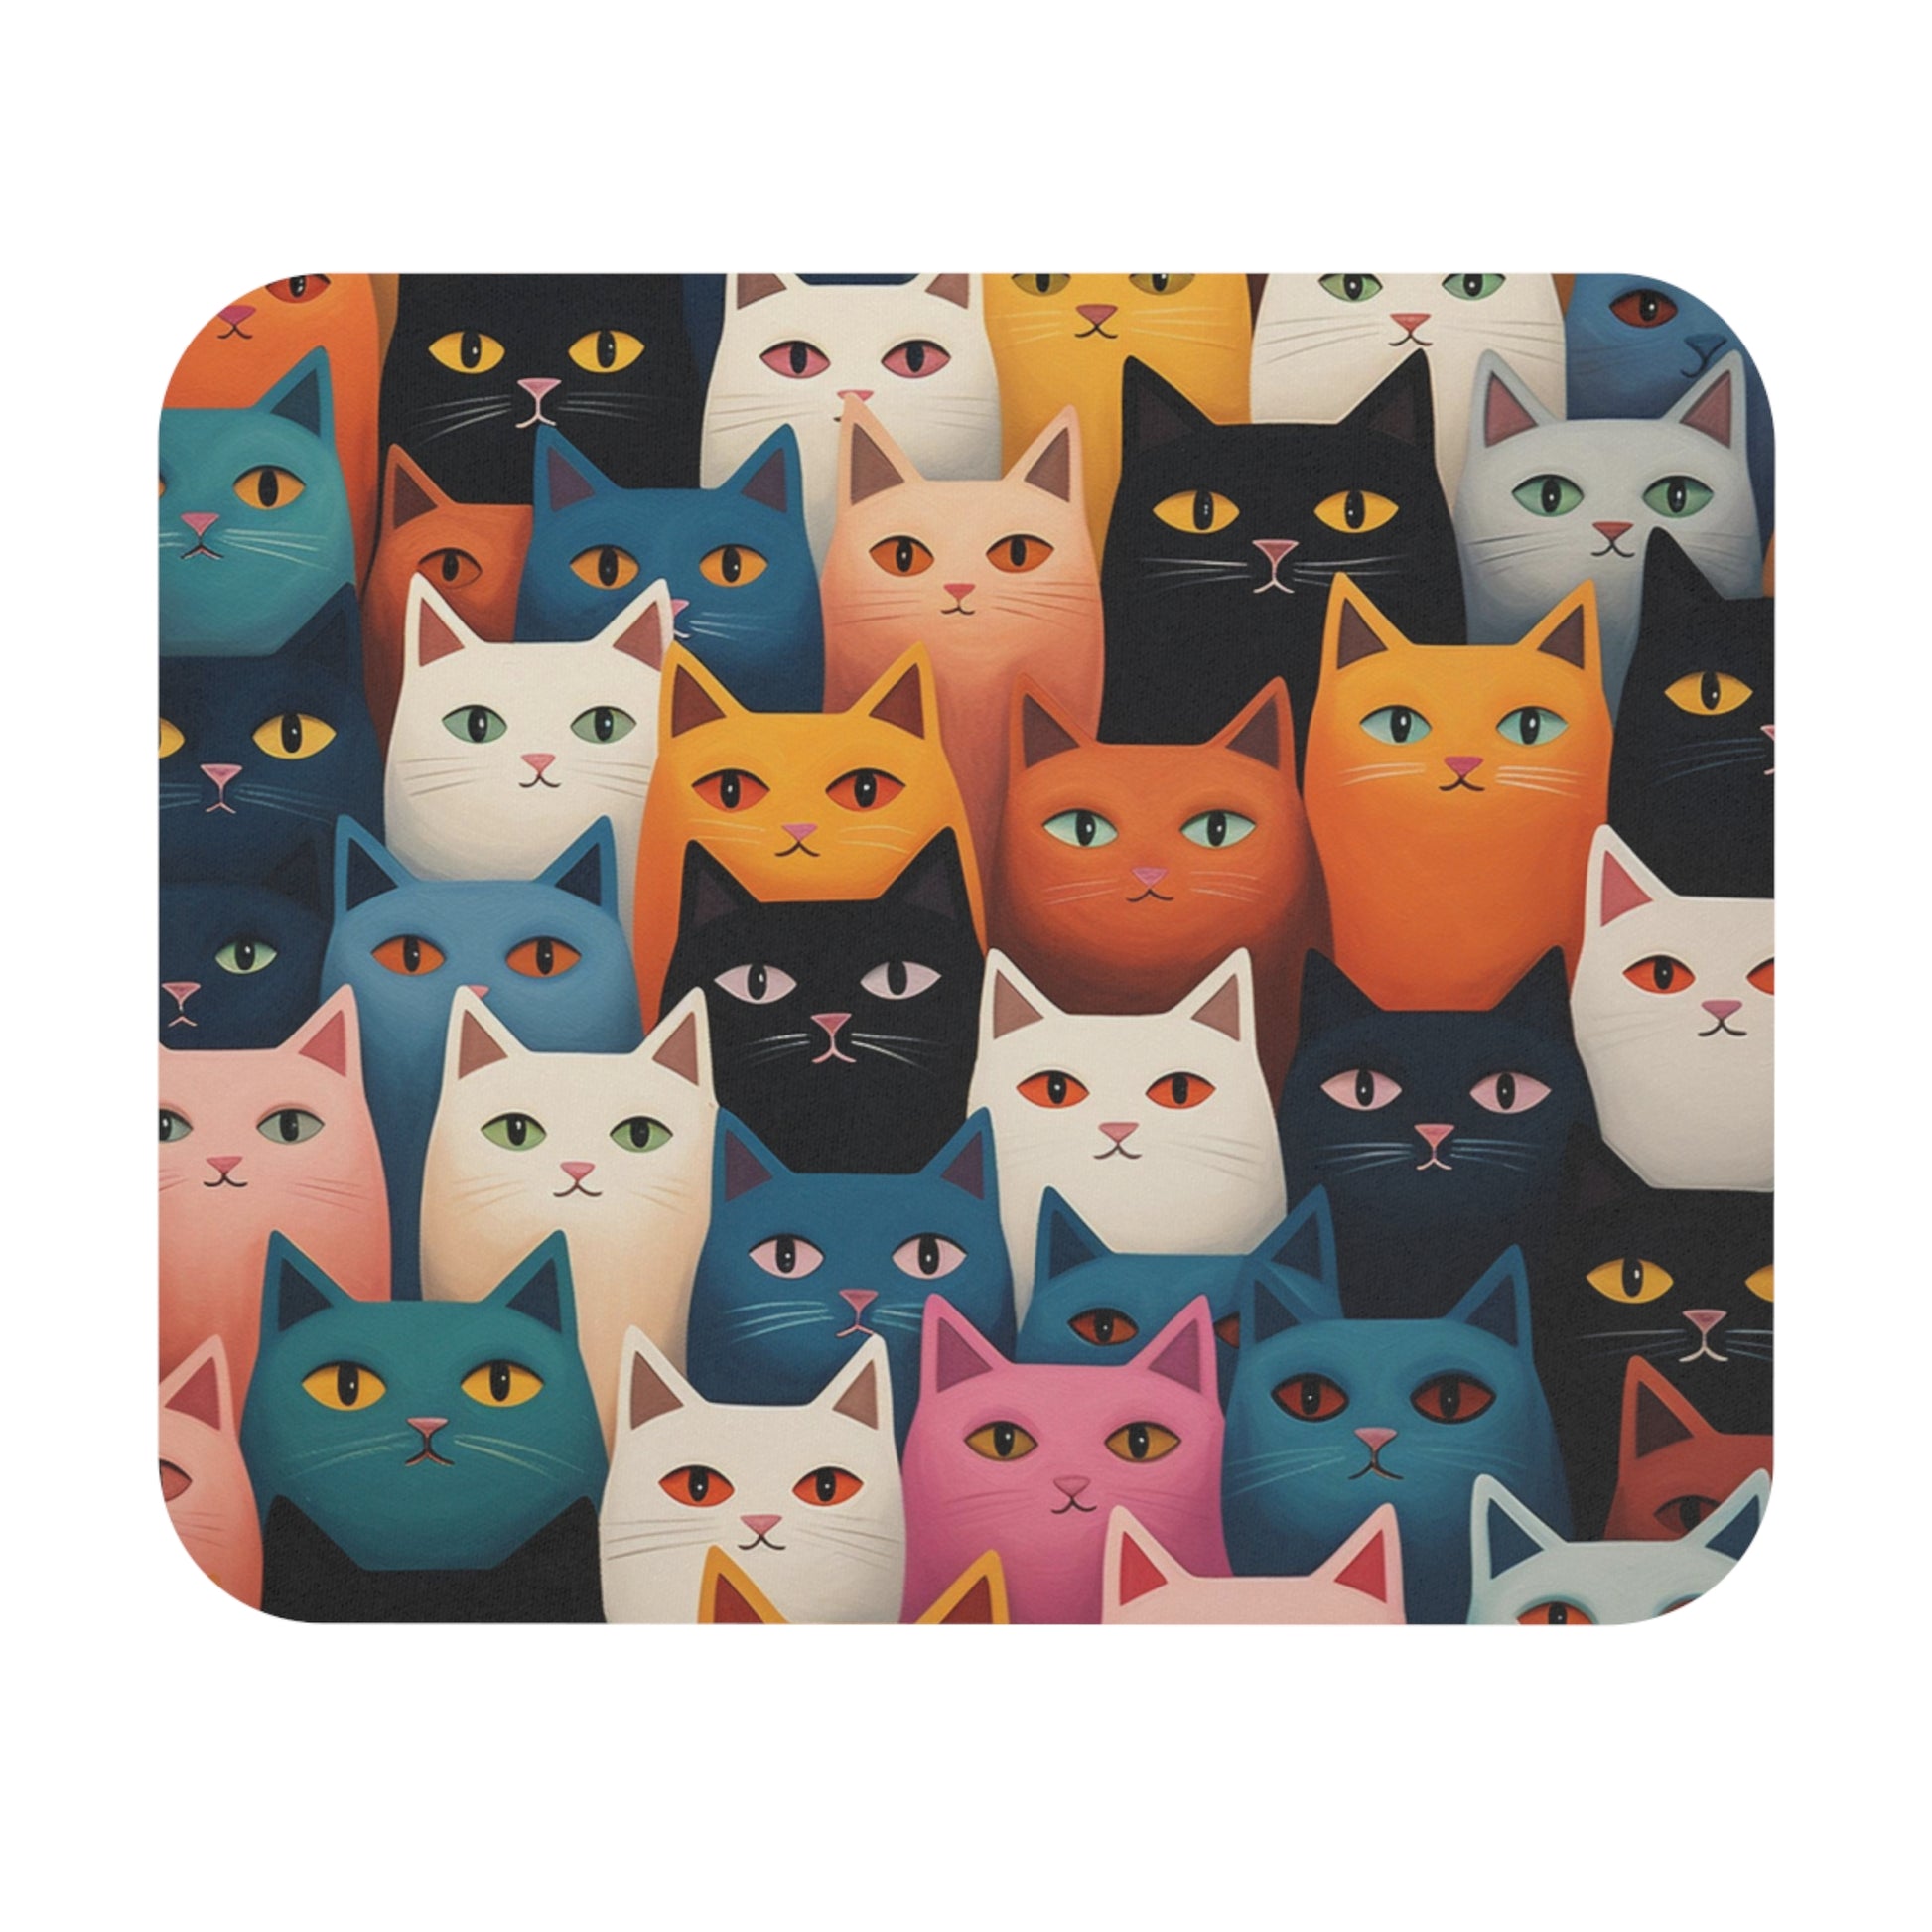 Cats Mouse Pad, Kittens Cute Art Computer Gaming Unique Printed Desk Cool Decorative Aesthetic Design Mat Gift Starcove Fashion